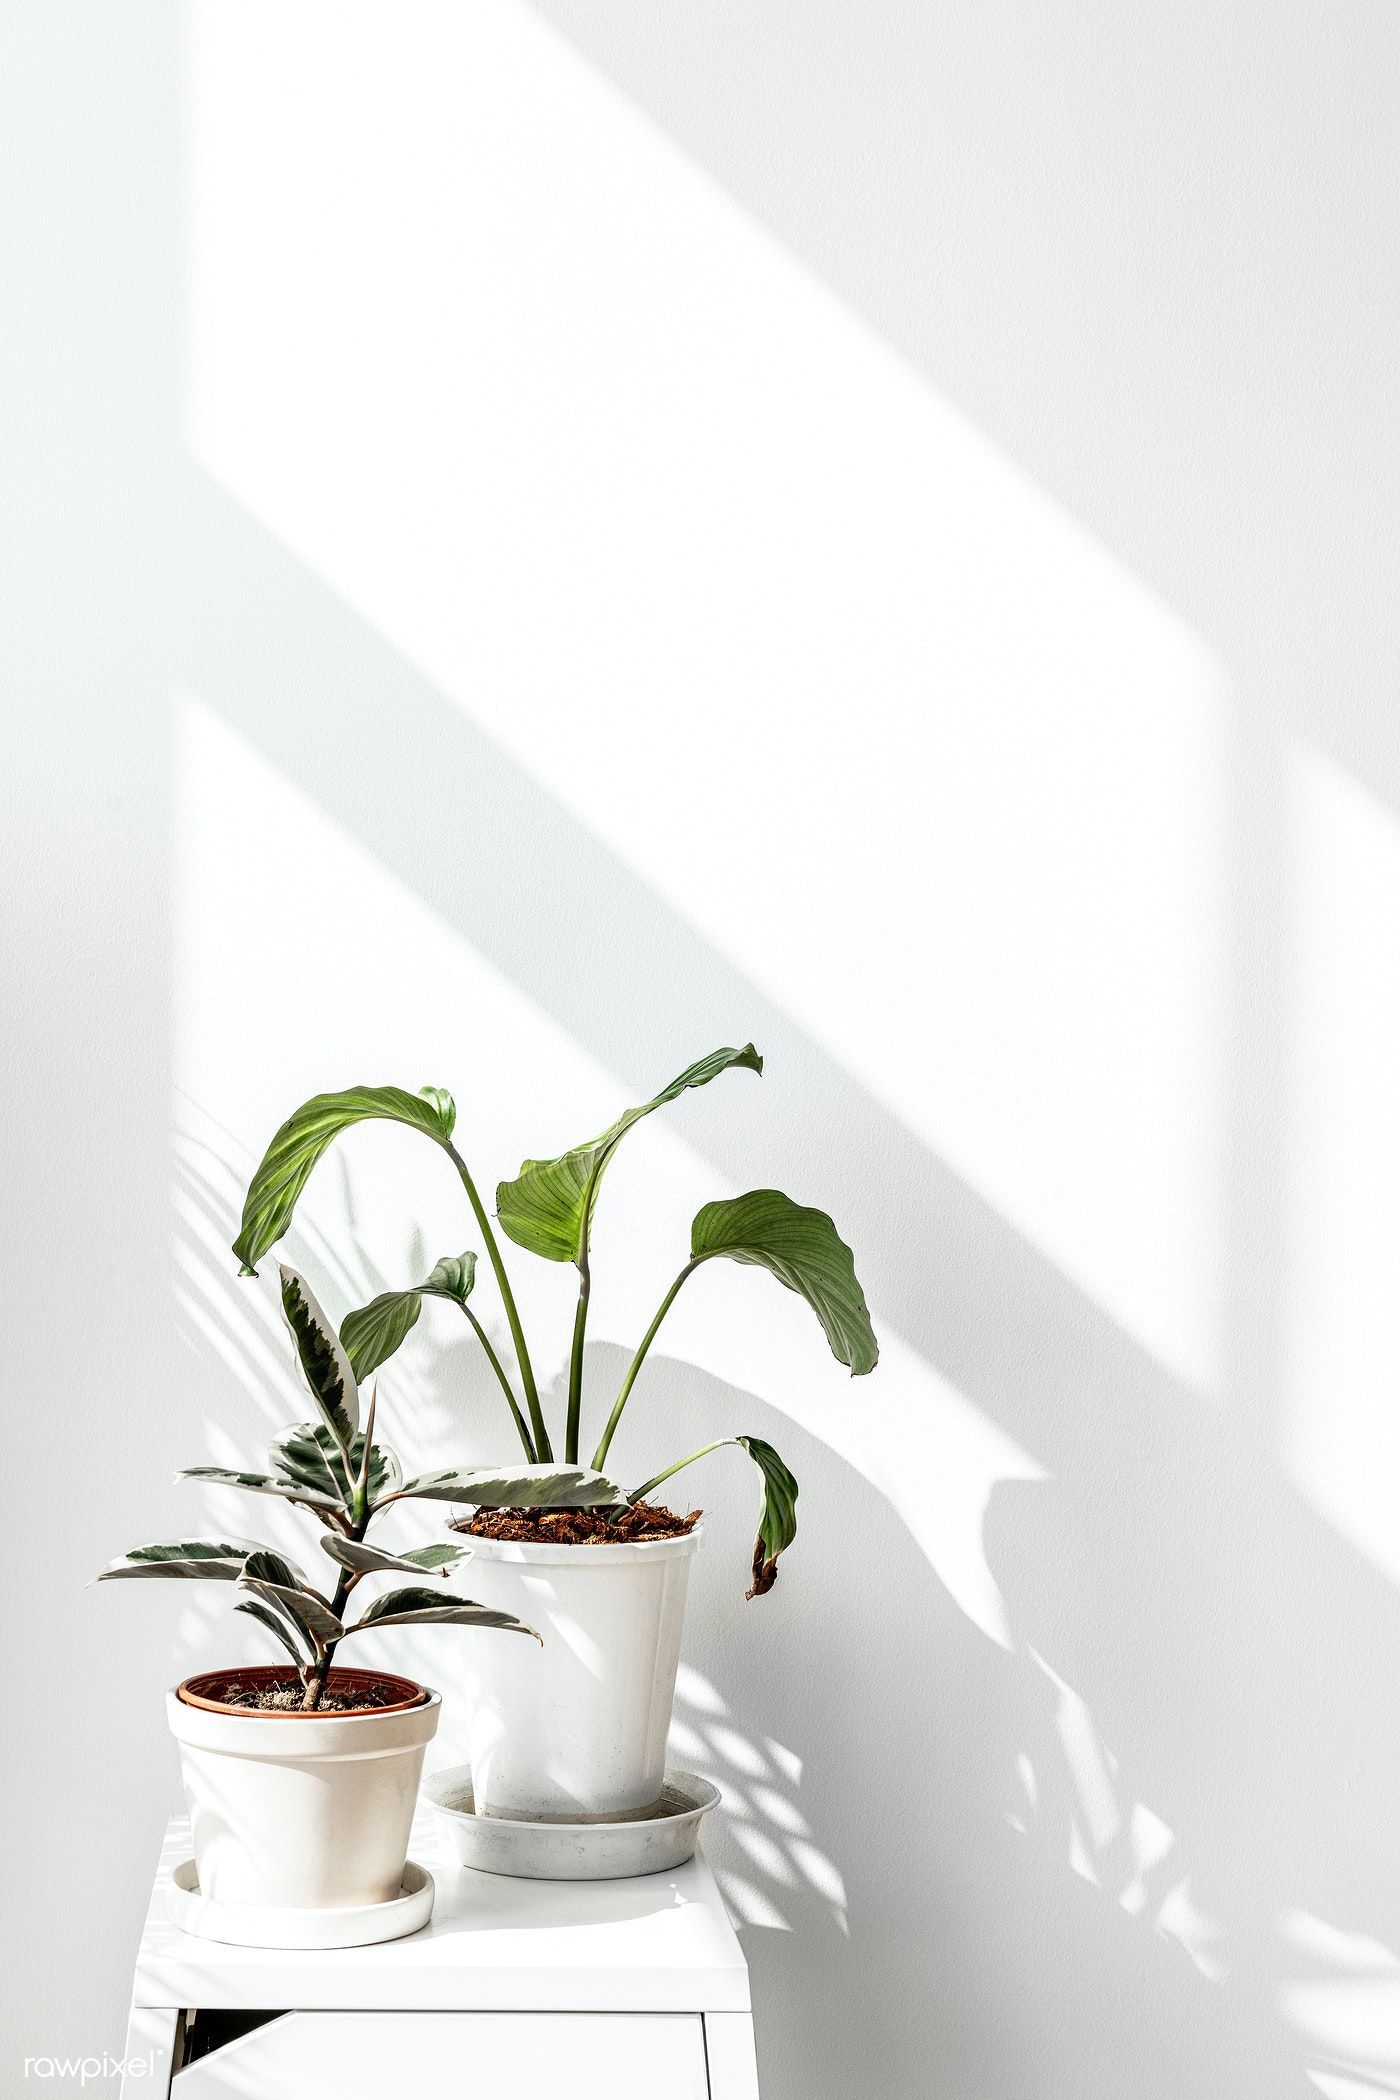 Potted plants on a white table - Succulent, plants